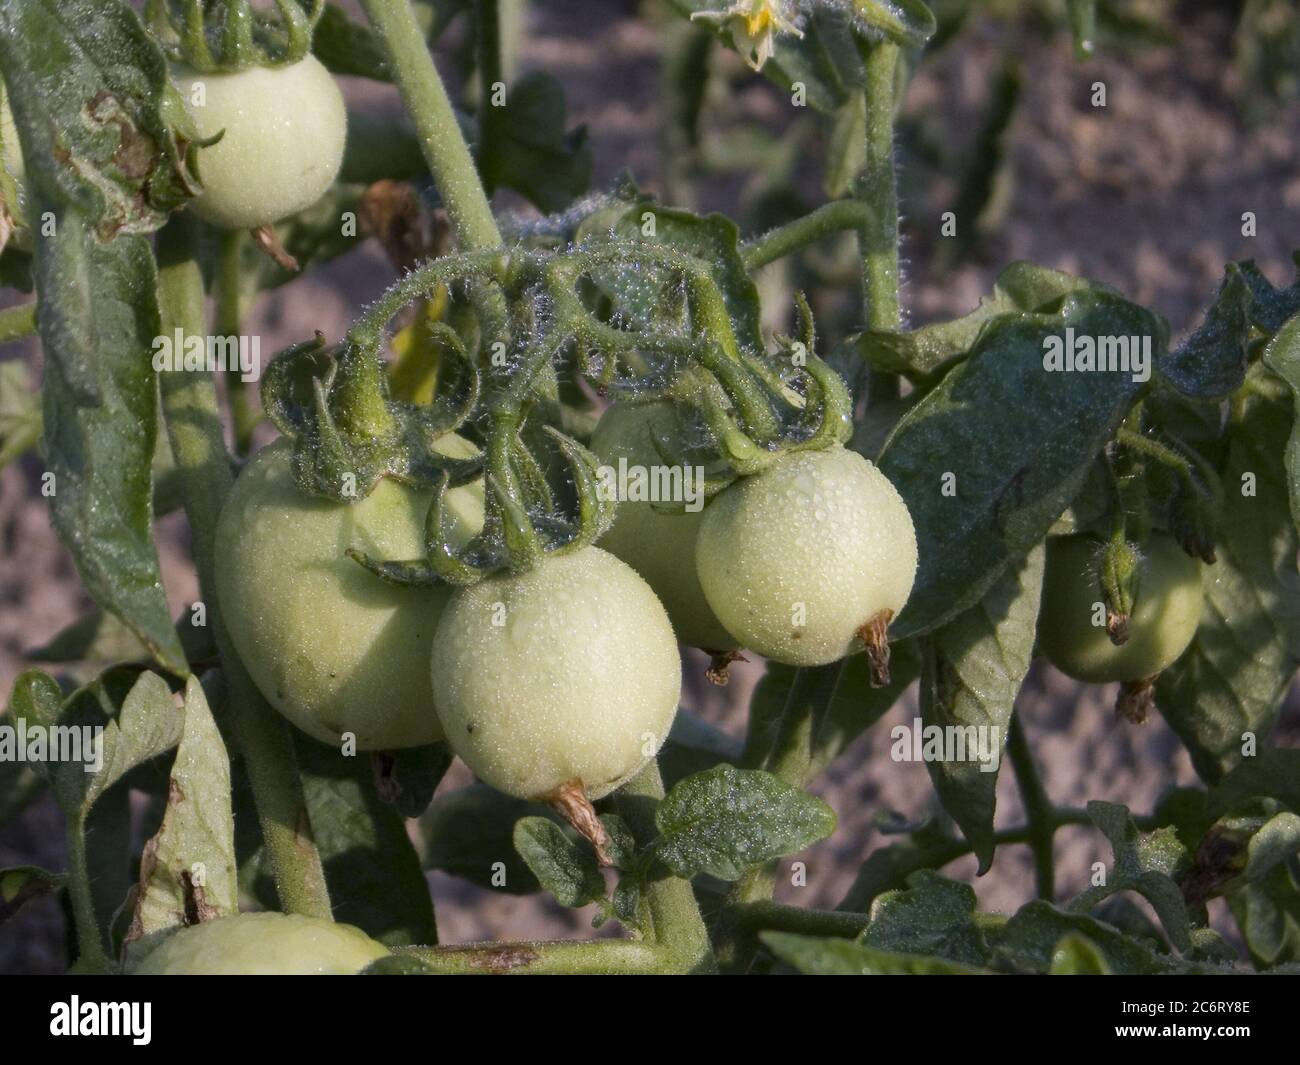 The tomato (Solanum lycopersicum, formerly Lycopersicon lycopersicum) is a plant in the Solanaceae or nightshade family, native to Central, South, and southern North America from Mexico to Peru. It is a short-lived perennial plant, grown as an annual plant, typically growing to 1–3 m in height, with a weak, woody stem that usually scrambles over other plants. Most tomatoes today are picked before fully ripe. They are bred to continue ripening, Once fully ripe, tomatoes can be stored in the refrigerator but are best eaten at room temperature. Stock Photo